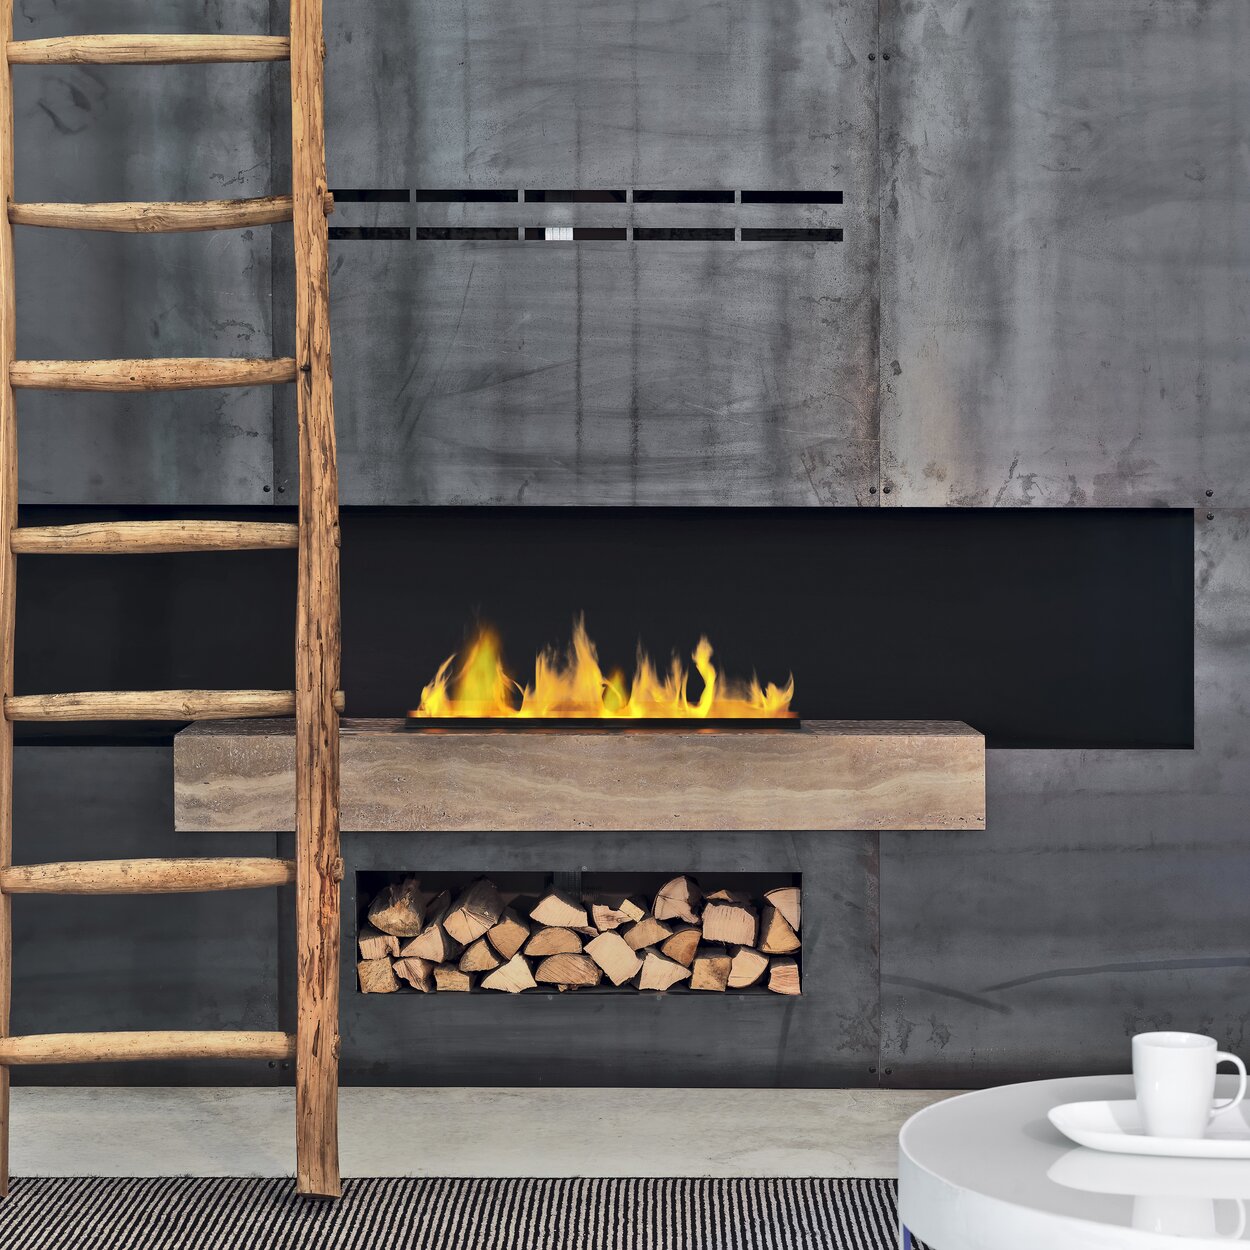 Cassette 500 electric fire from Dimplex built into concrete wall with wood details